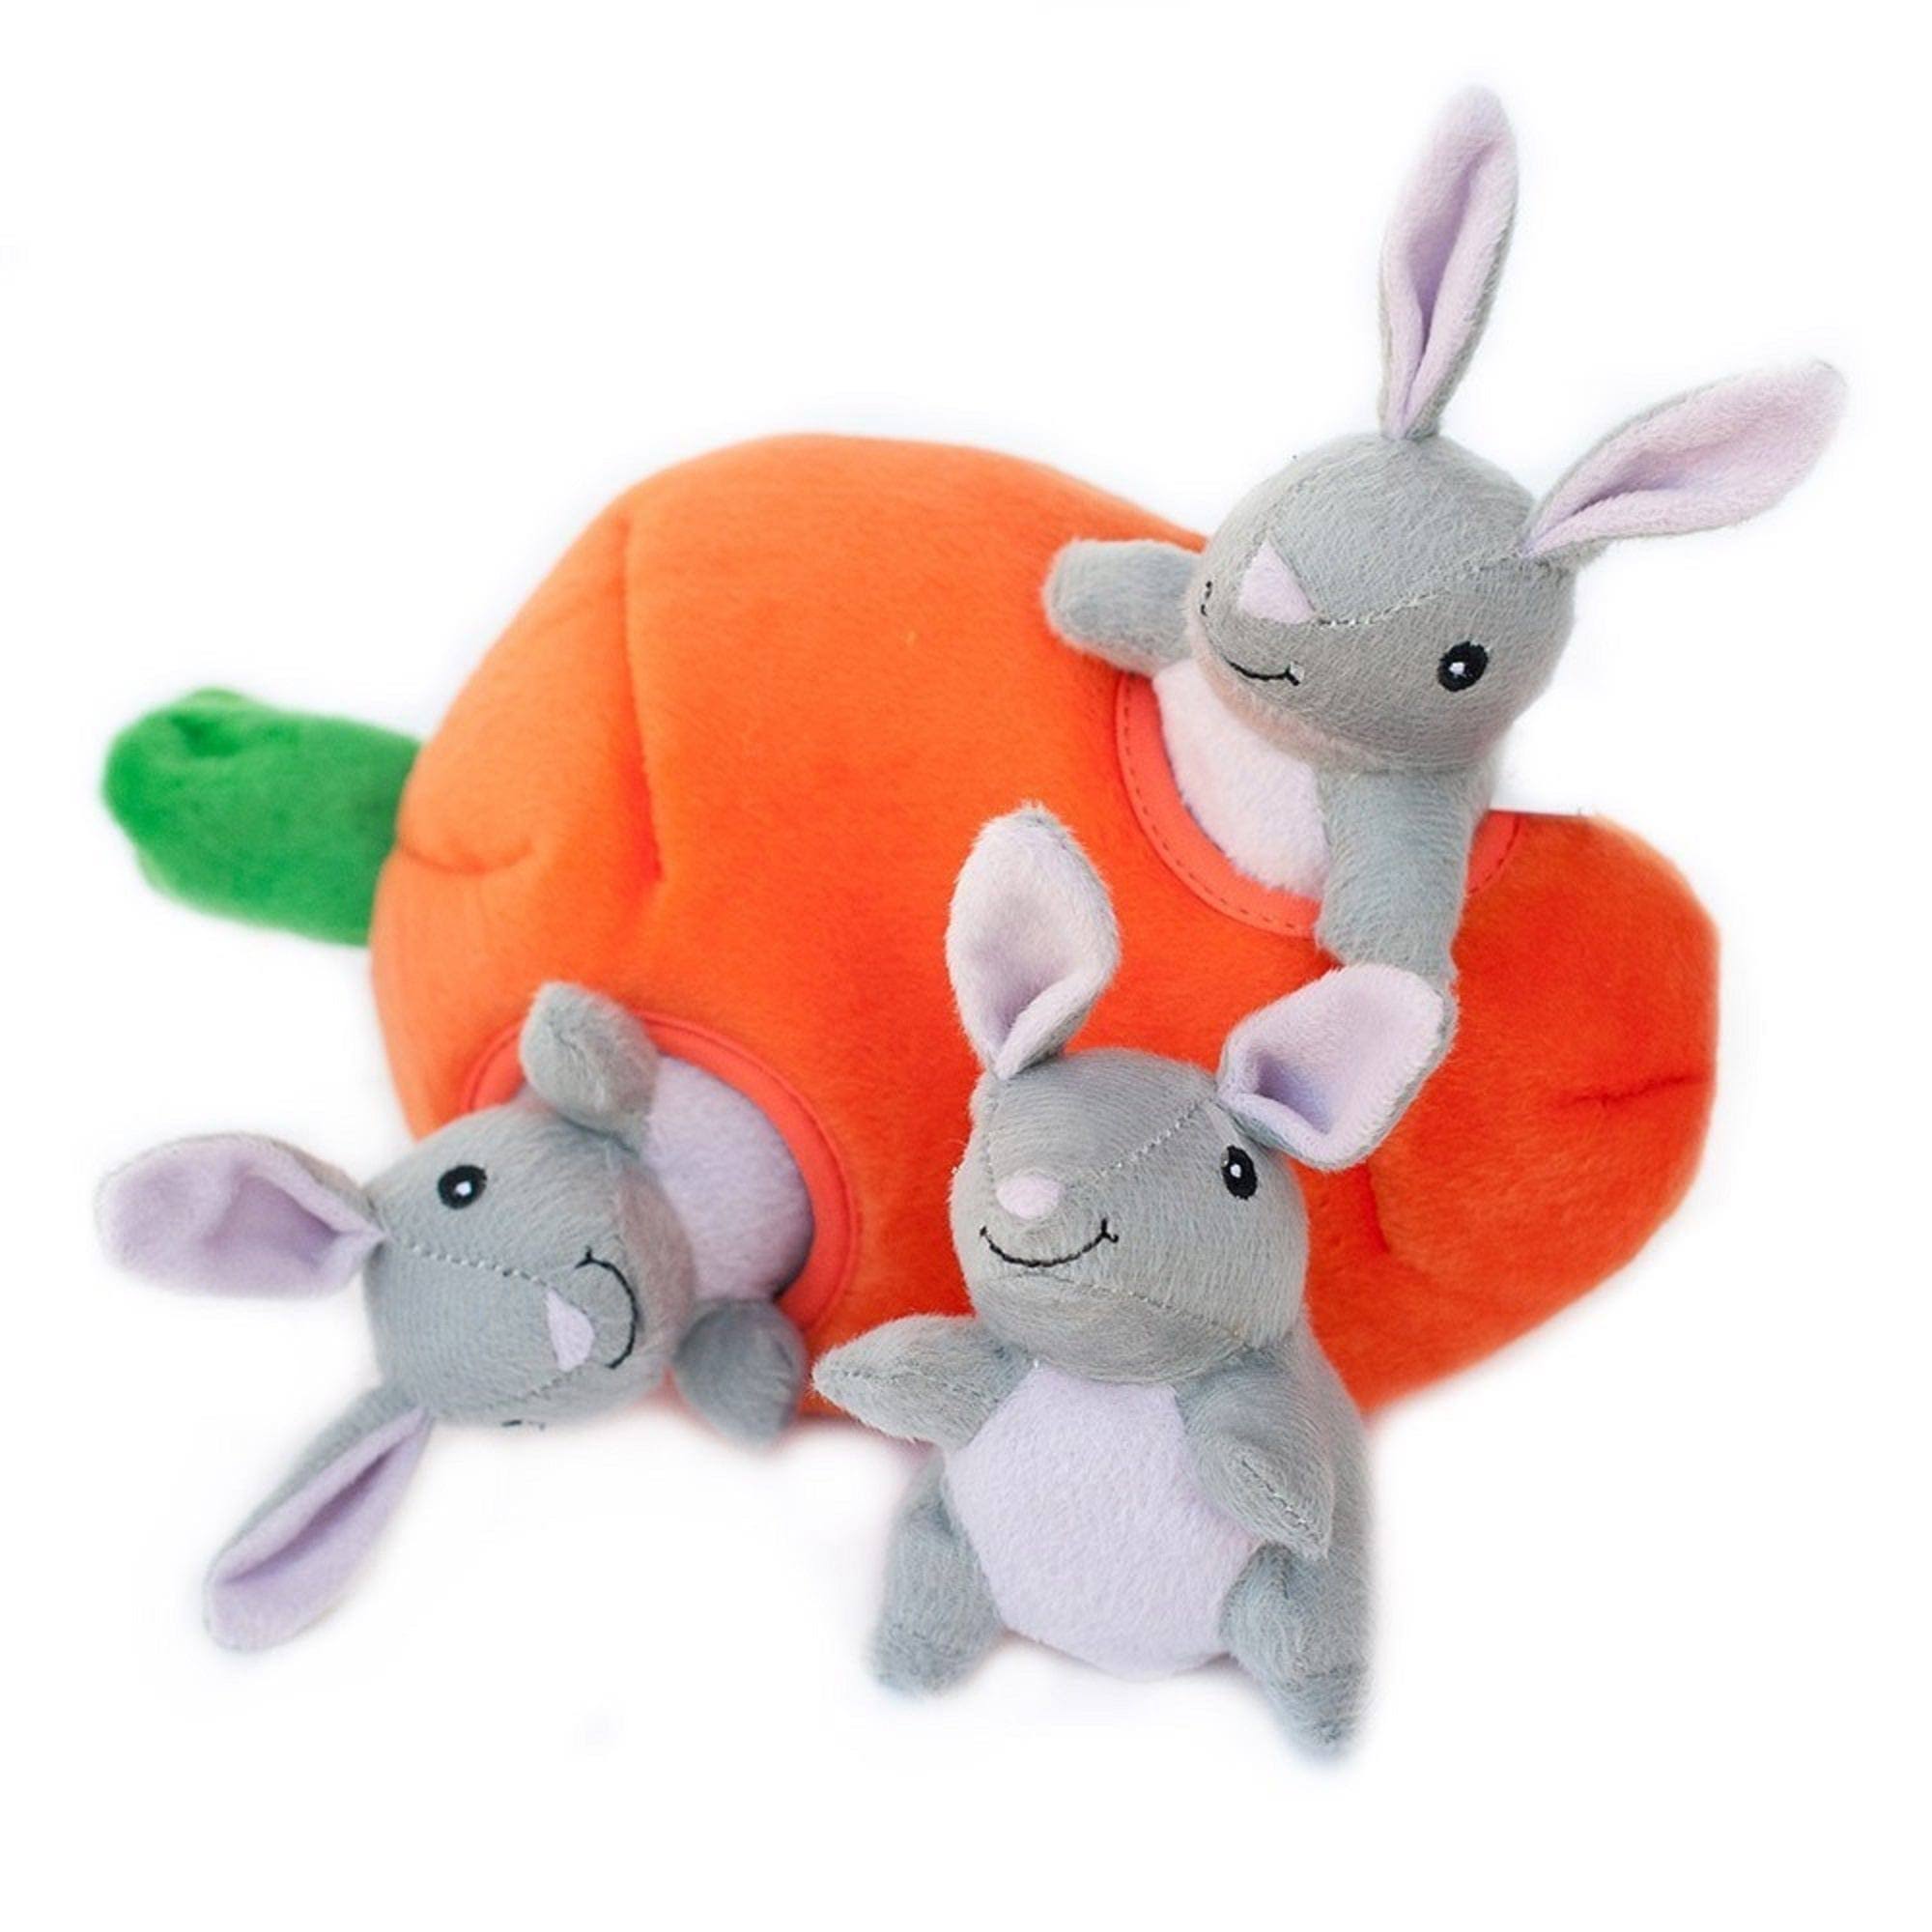 ZippyPaws Burrow Squeaky Hide and Seek Plush Dog Toy - Bunny 'n Carrot